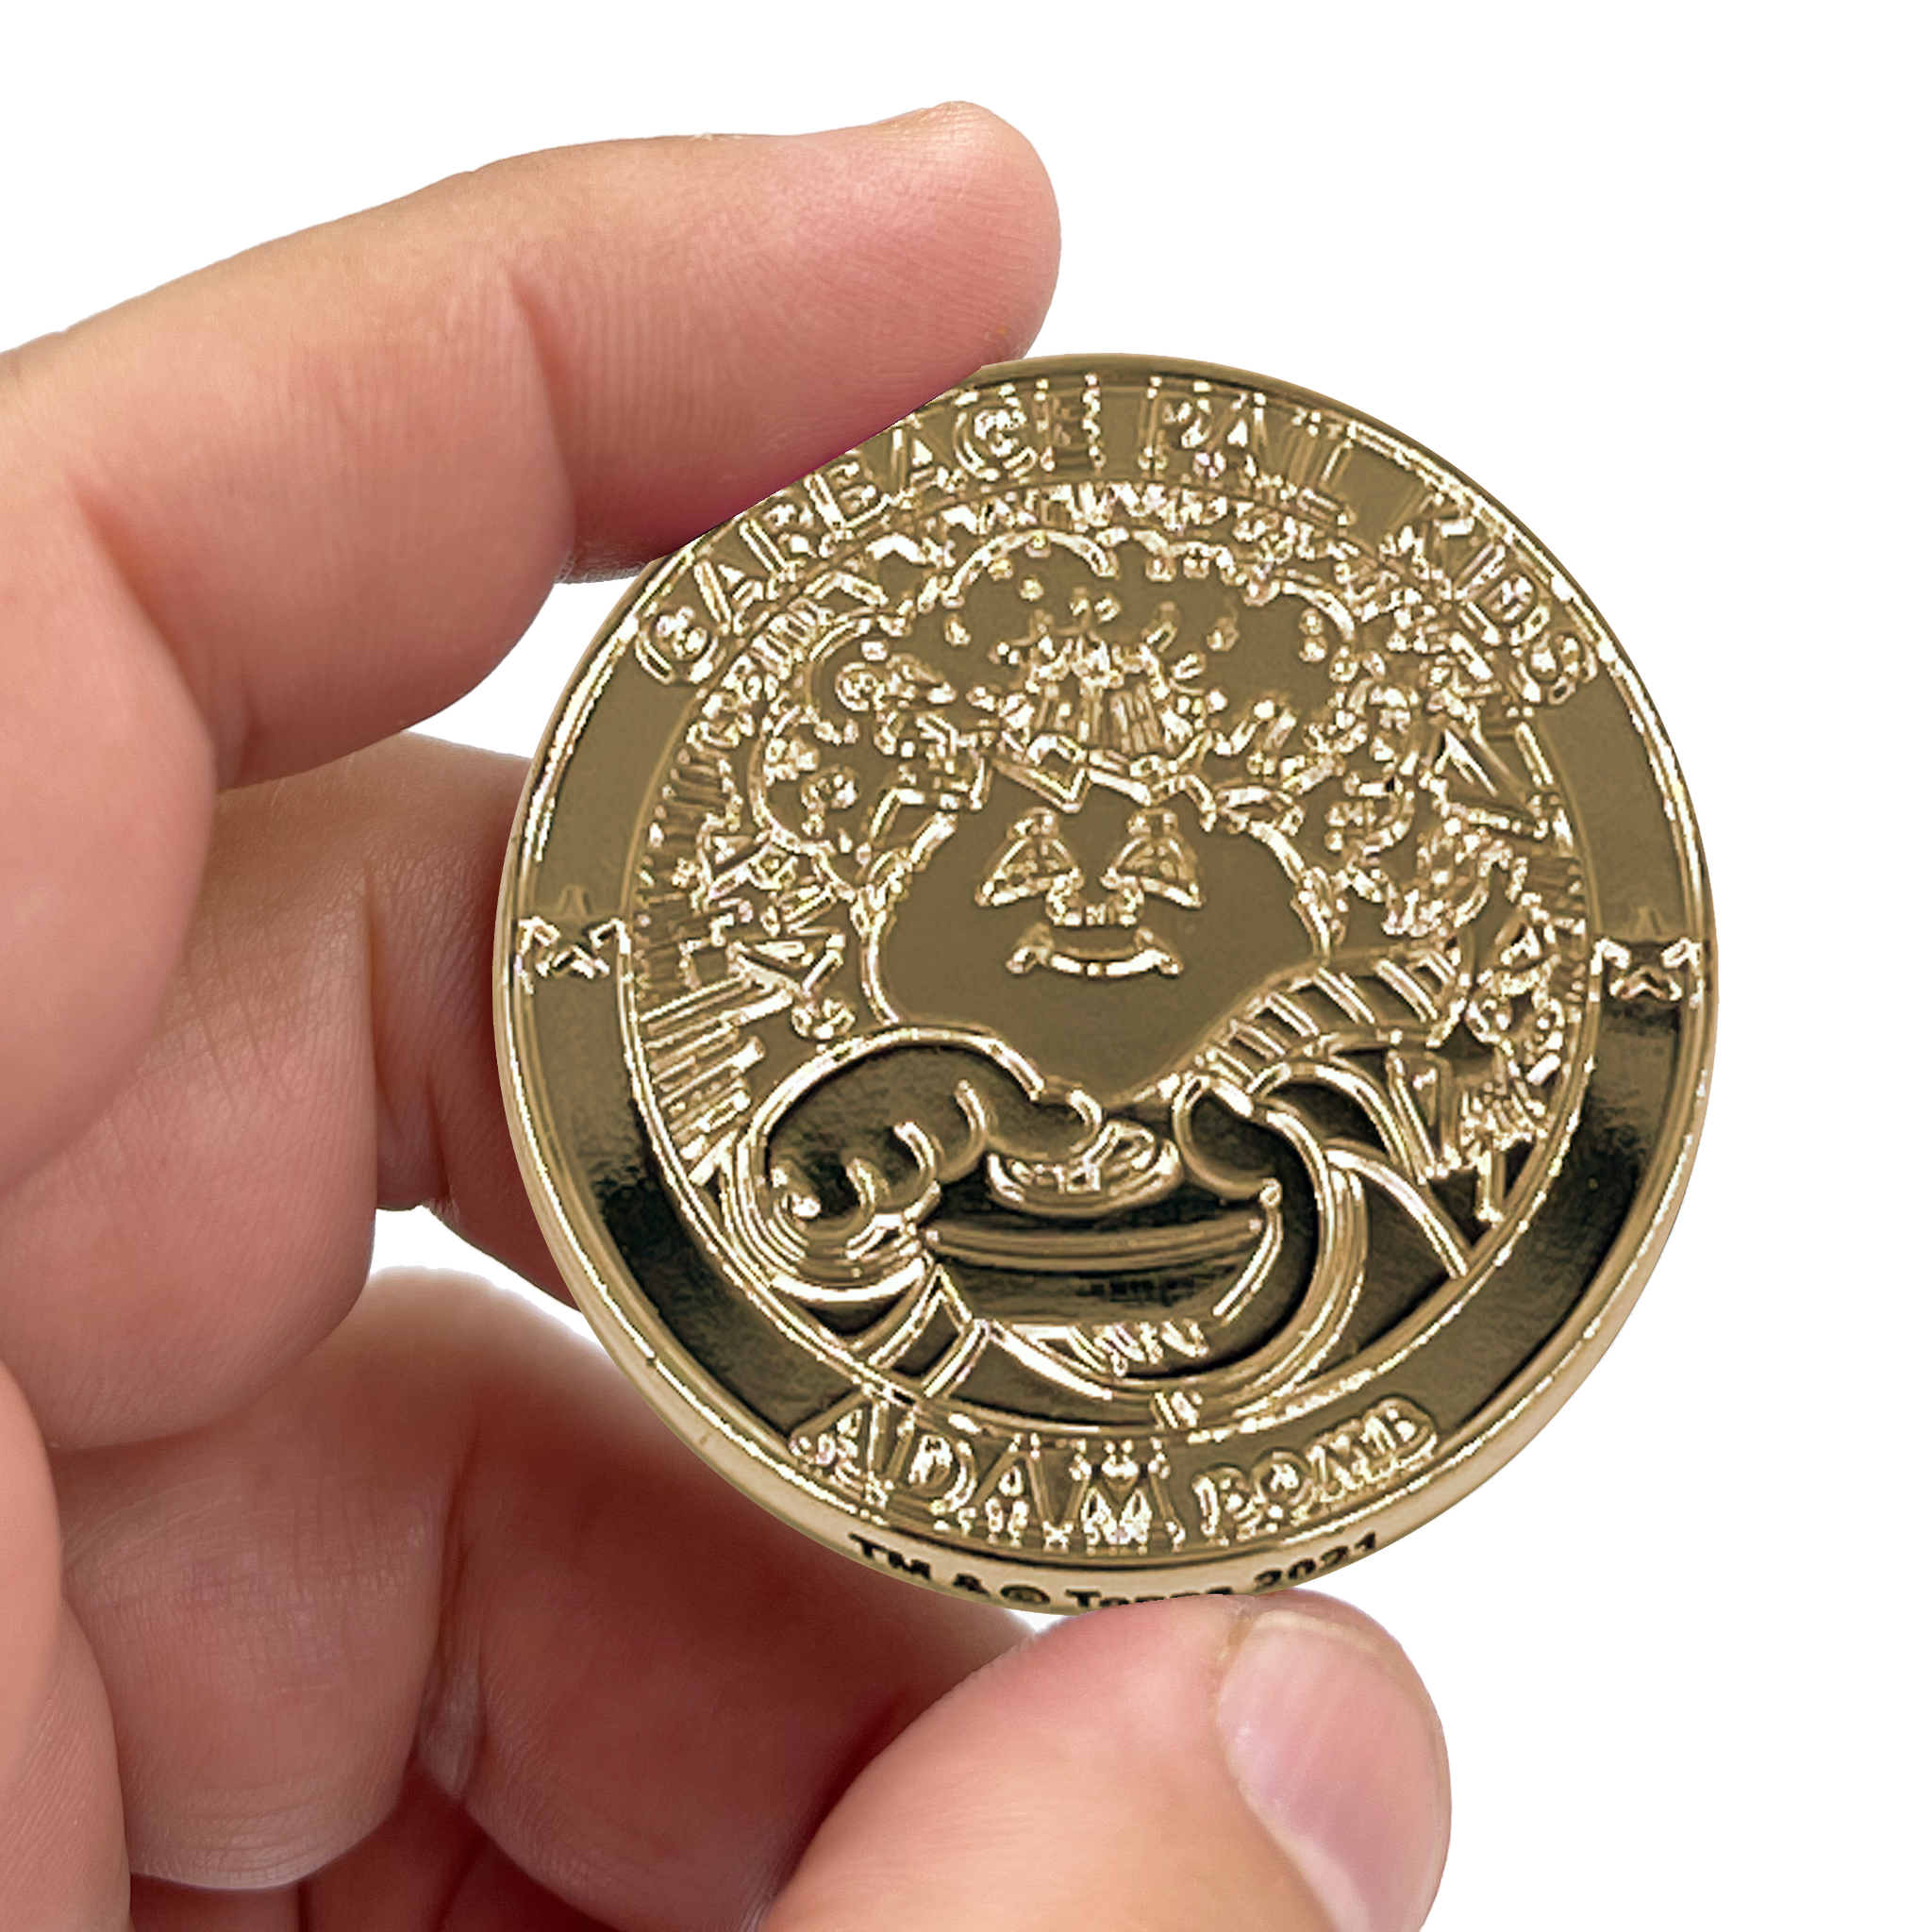 Super Limited Edition Simko GPK 24KT GOLD plated variation coin: only 15 made